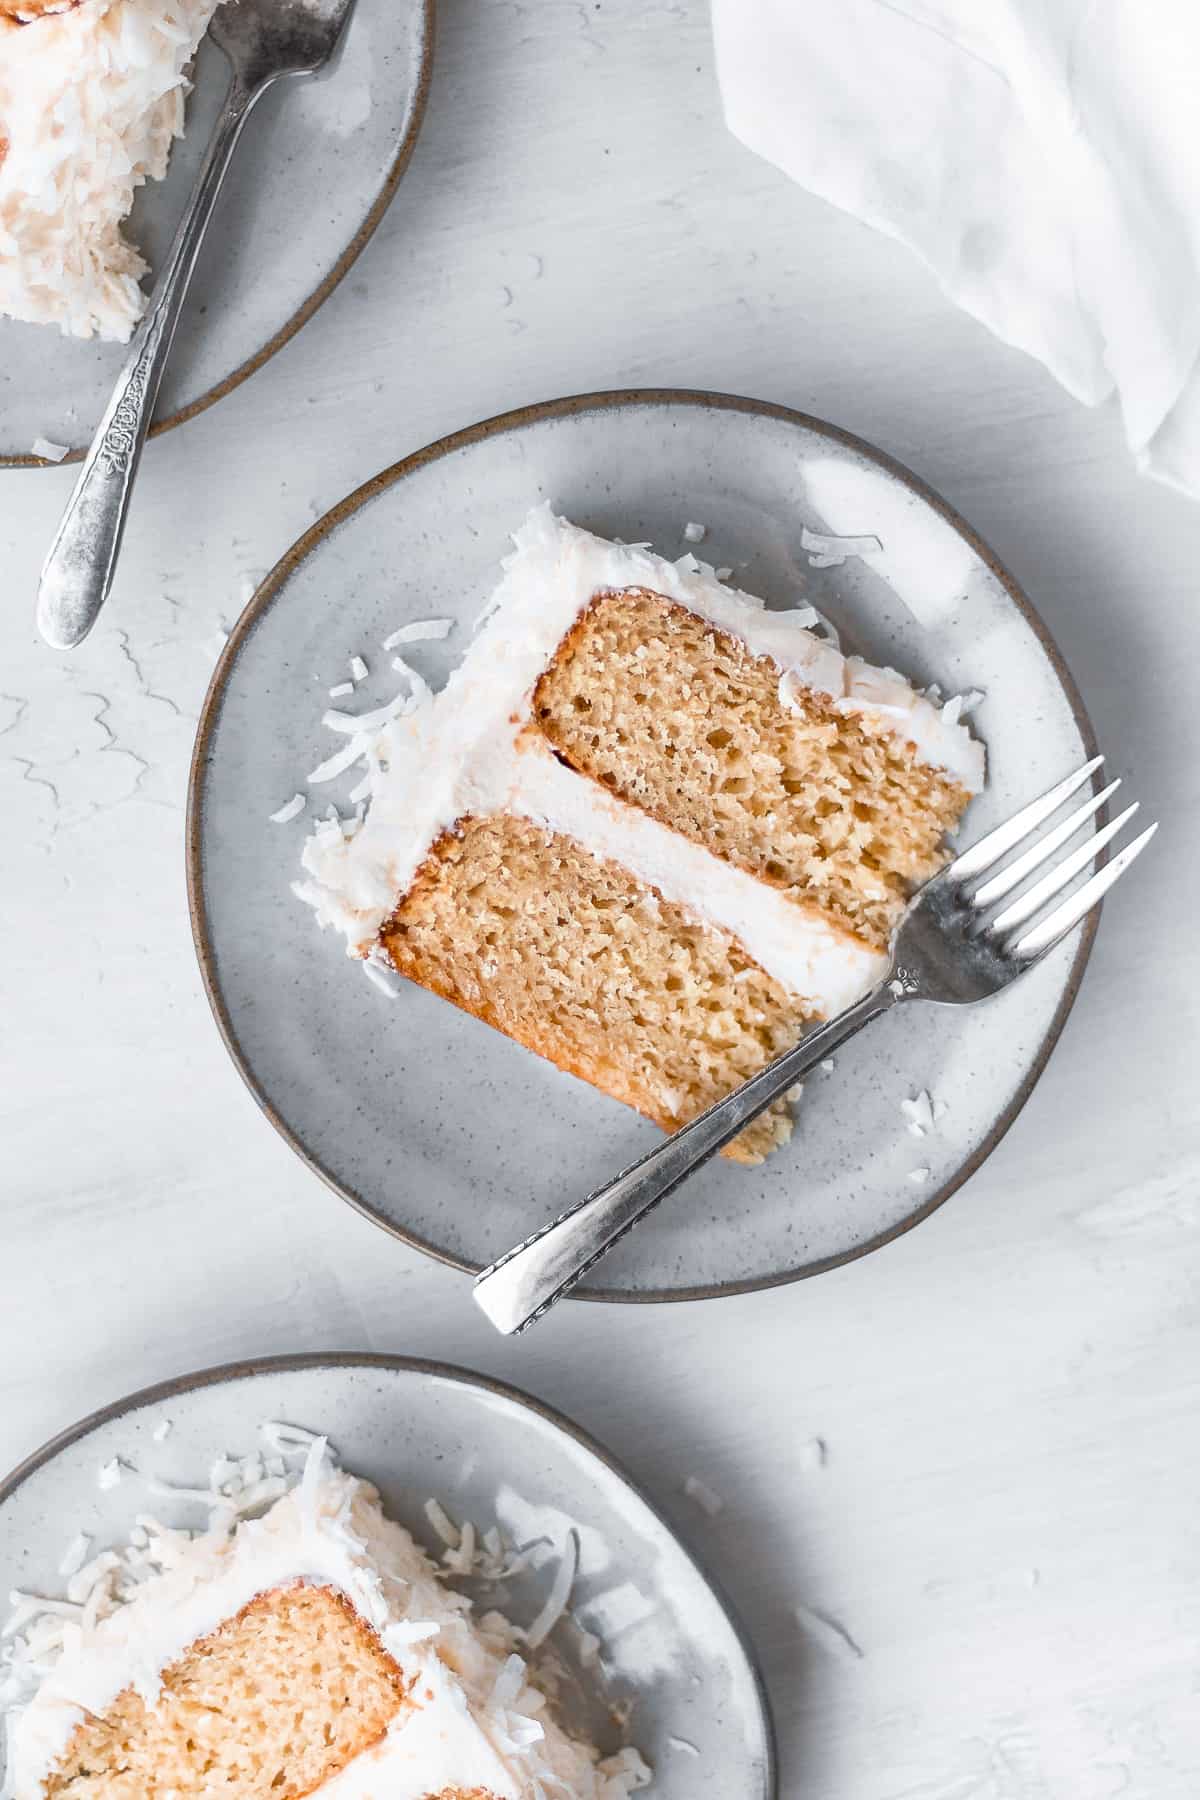 Overhead view showing 3 slices of vegan coconut cake on plate with forks on the side. 